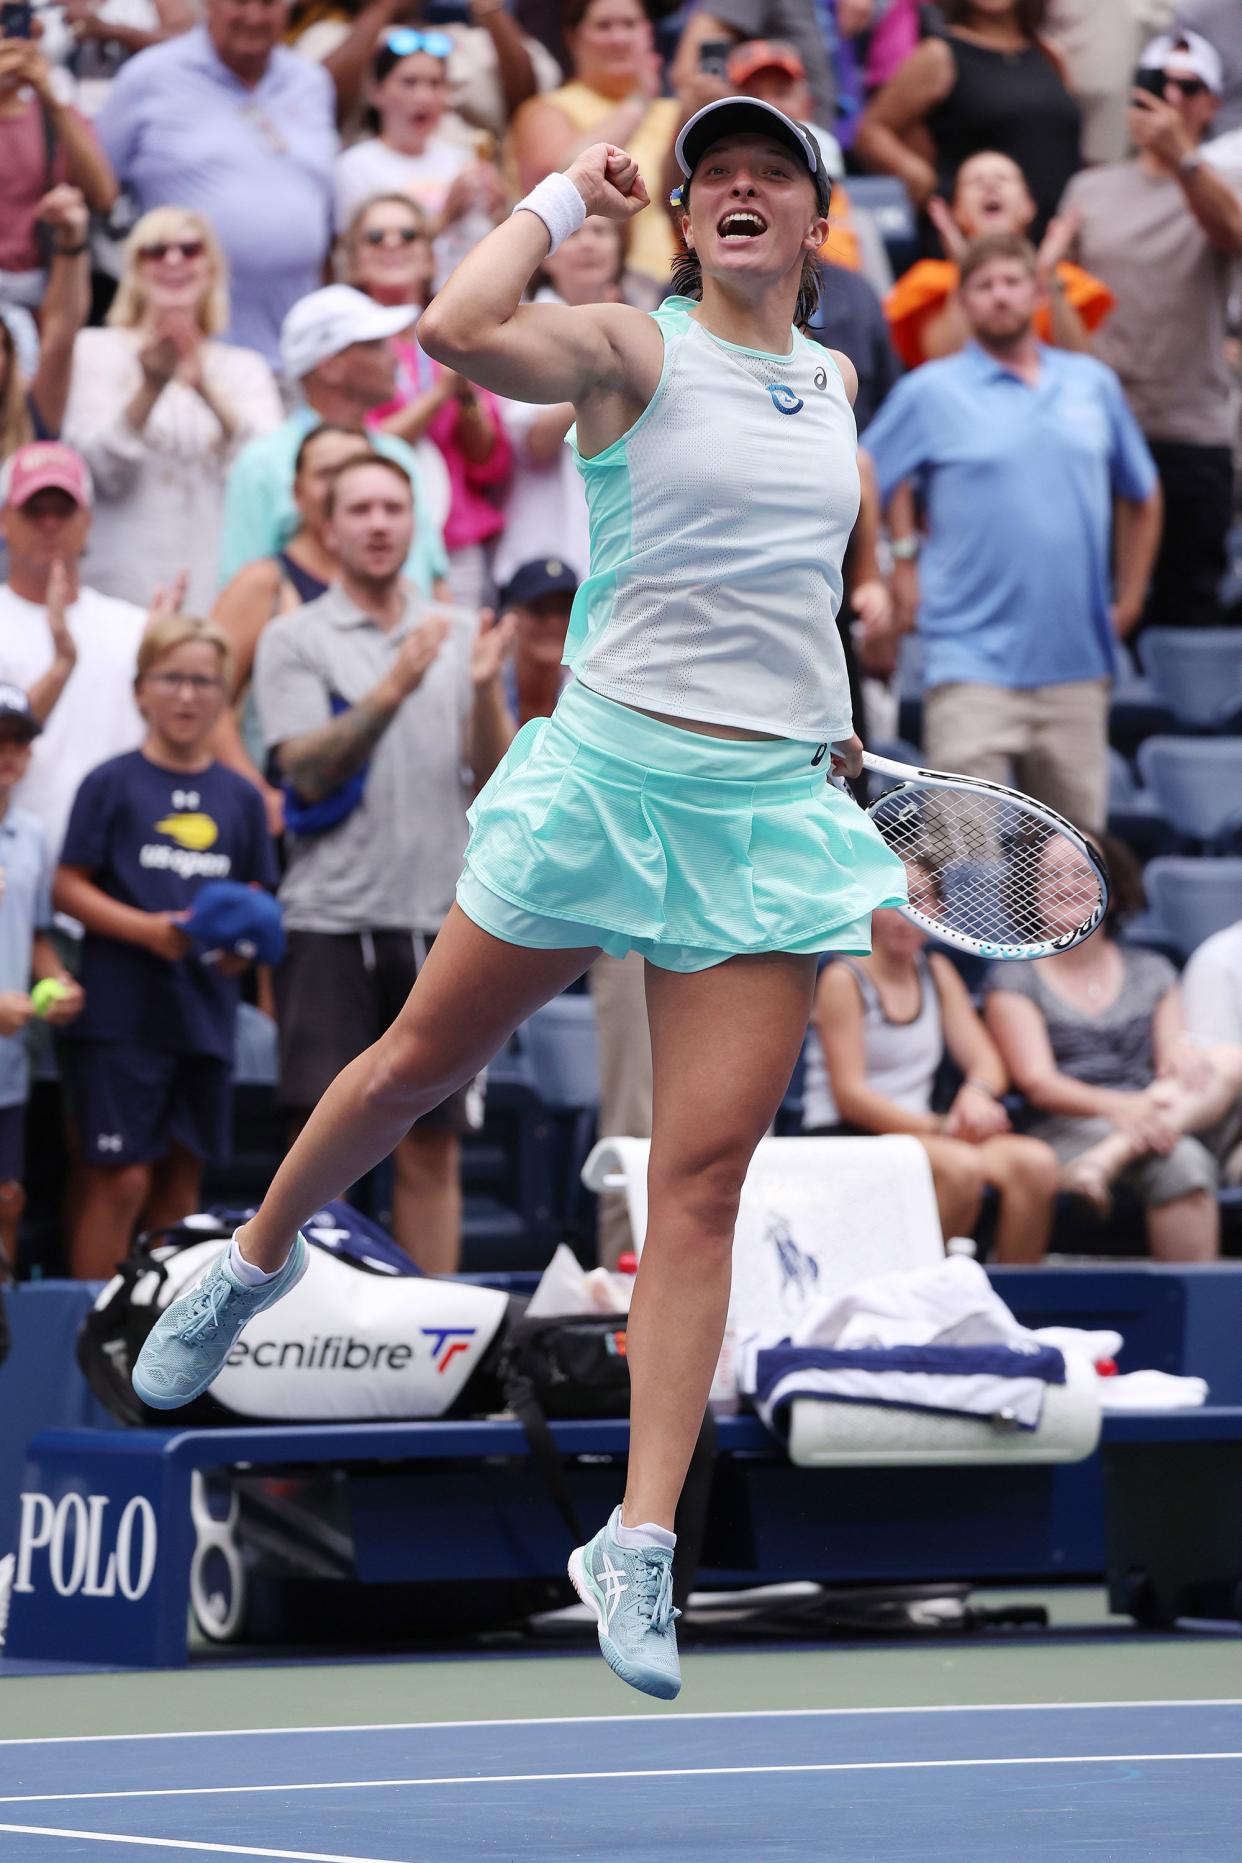 Iga Swiatek of Poland celebrates after defeating Jule Niemeier of Germany during their Women’s Singles Fourth Round match on Day Eight of the 2022 U.S. Open at USTA Billie Jean King National Tennis Center on Sept. 5, 2022, in Flushing, Queens.